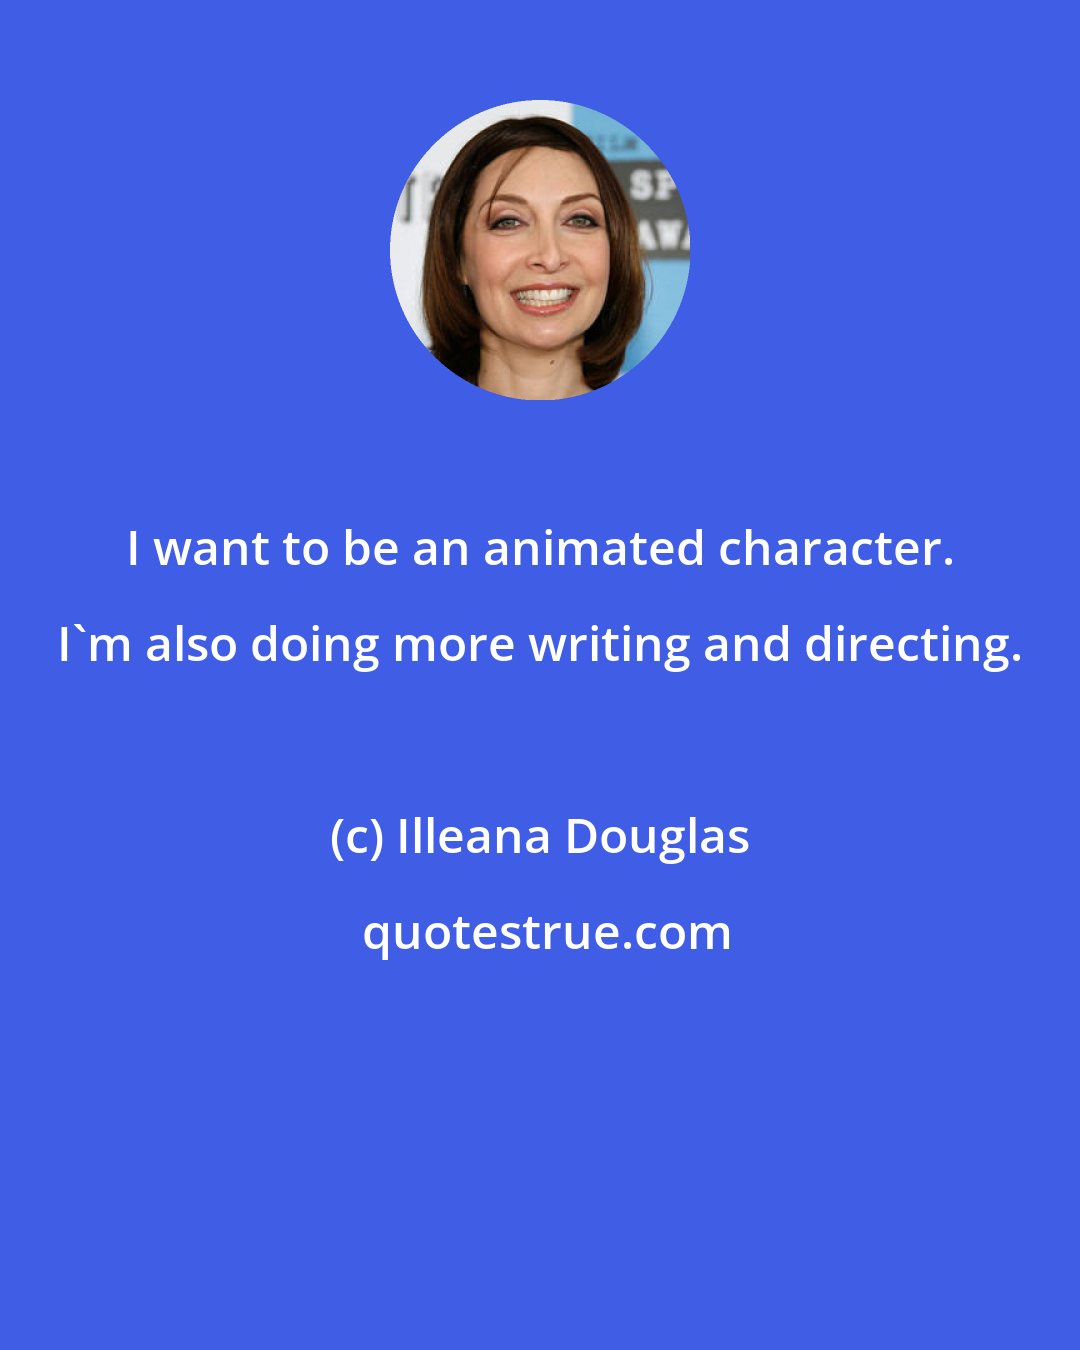 Illeana Douglas: I want to be an animated character. I'm also doing more writing and directing.